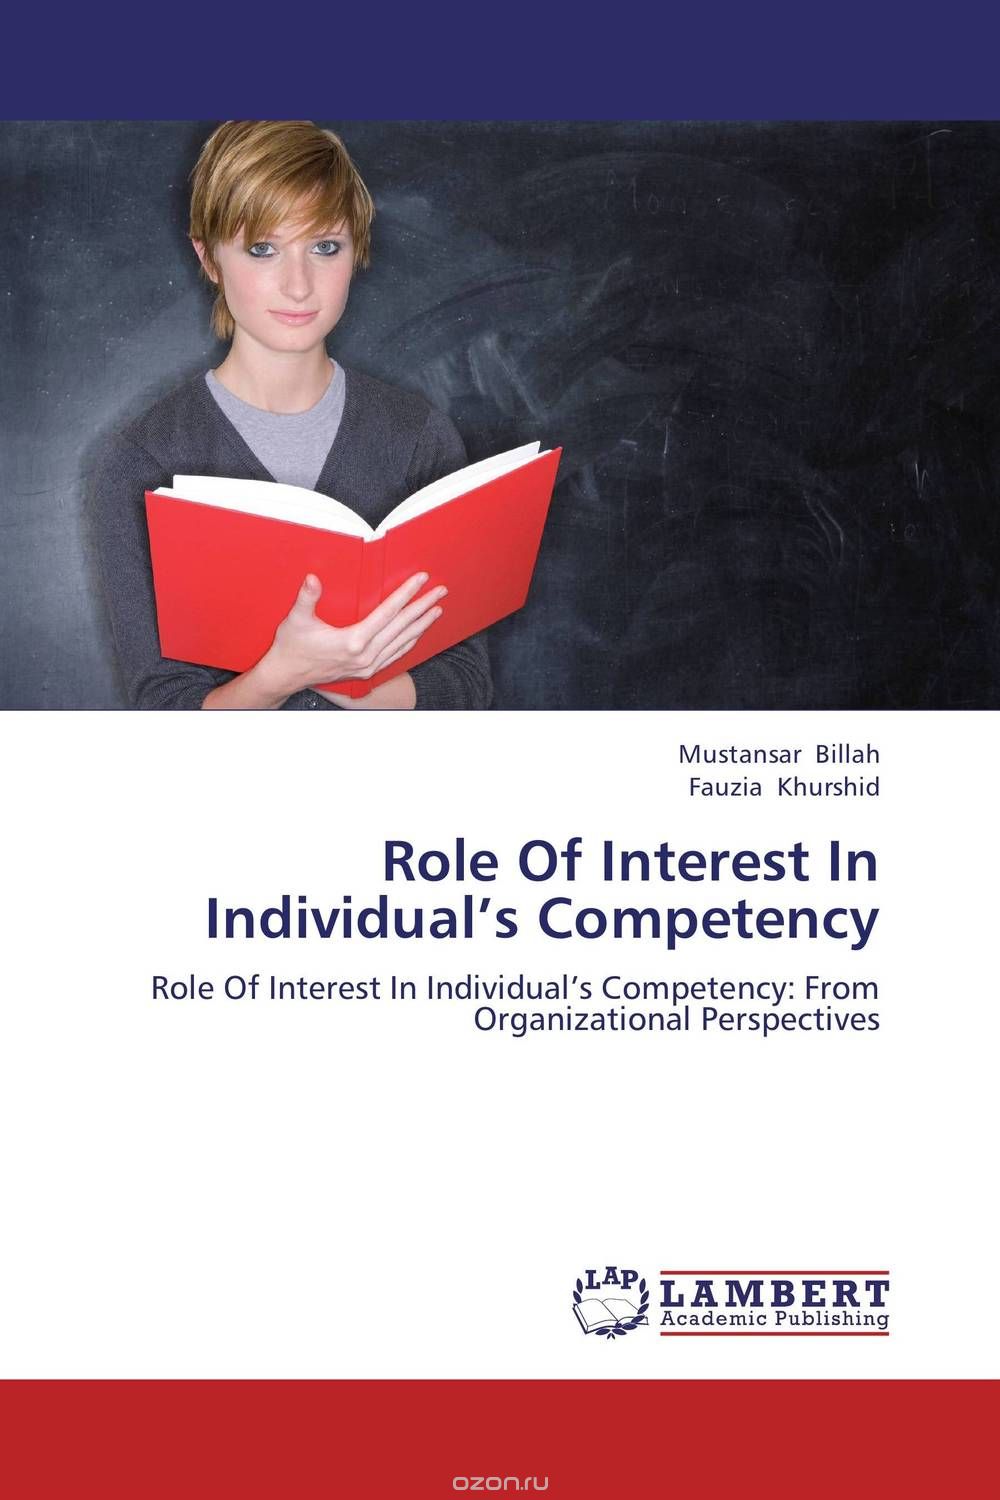 Role Of Interest In Individual’s Competency